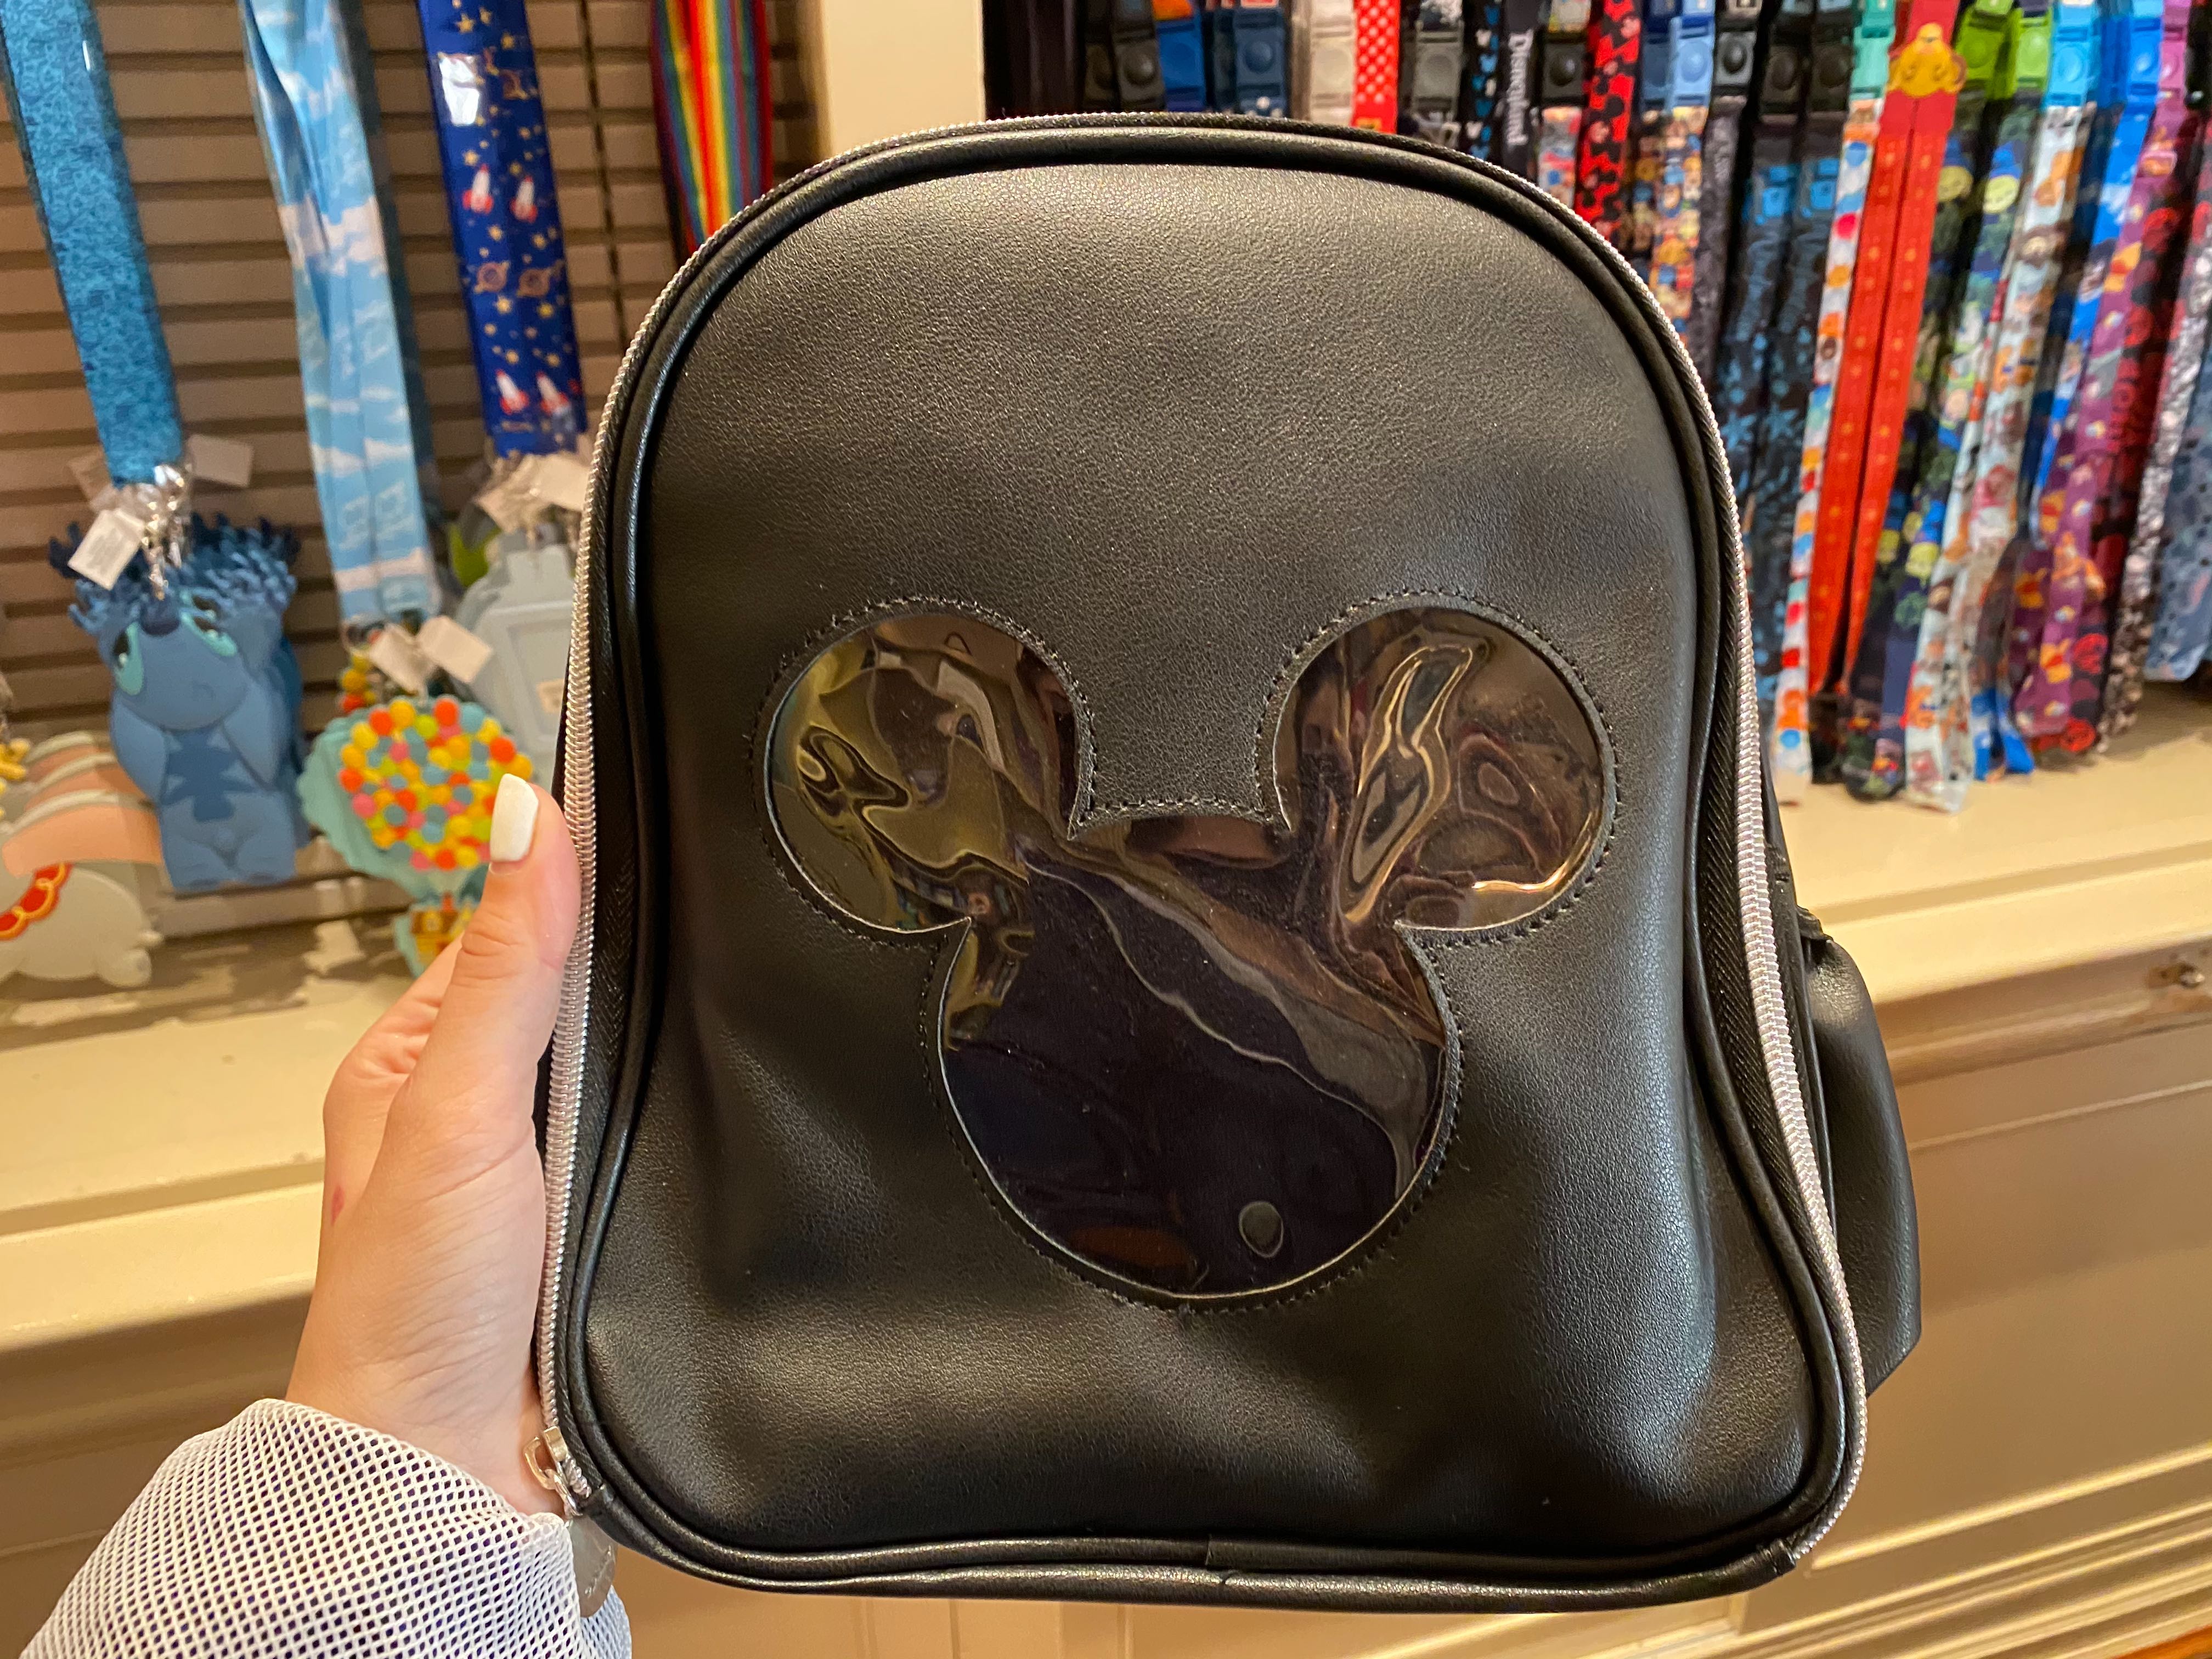 PHOTOS: New Disney Pin Trading Bags for Every Style Arrive at 